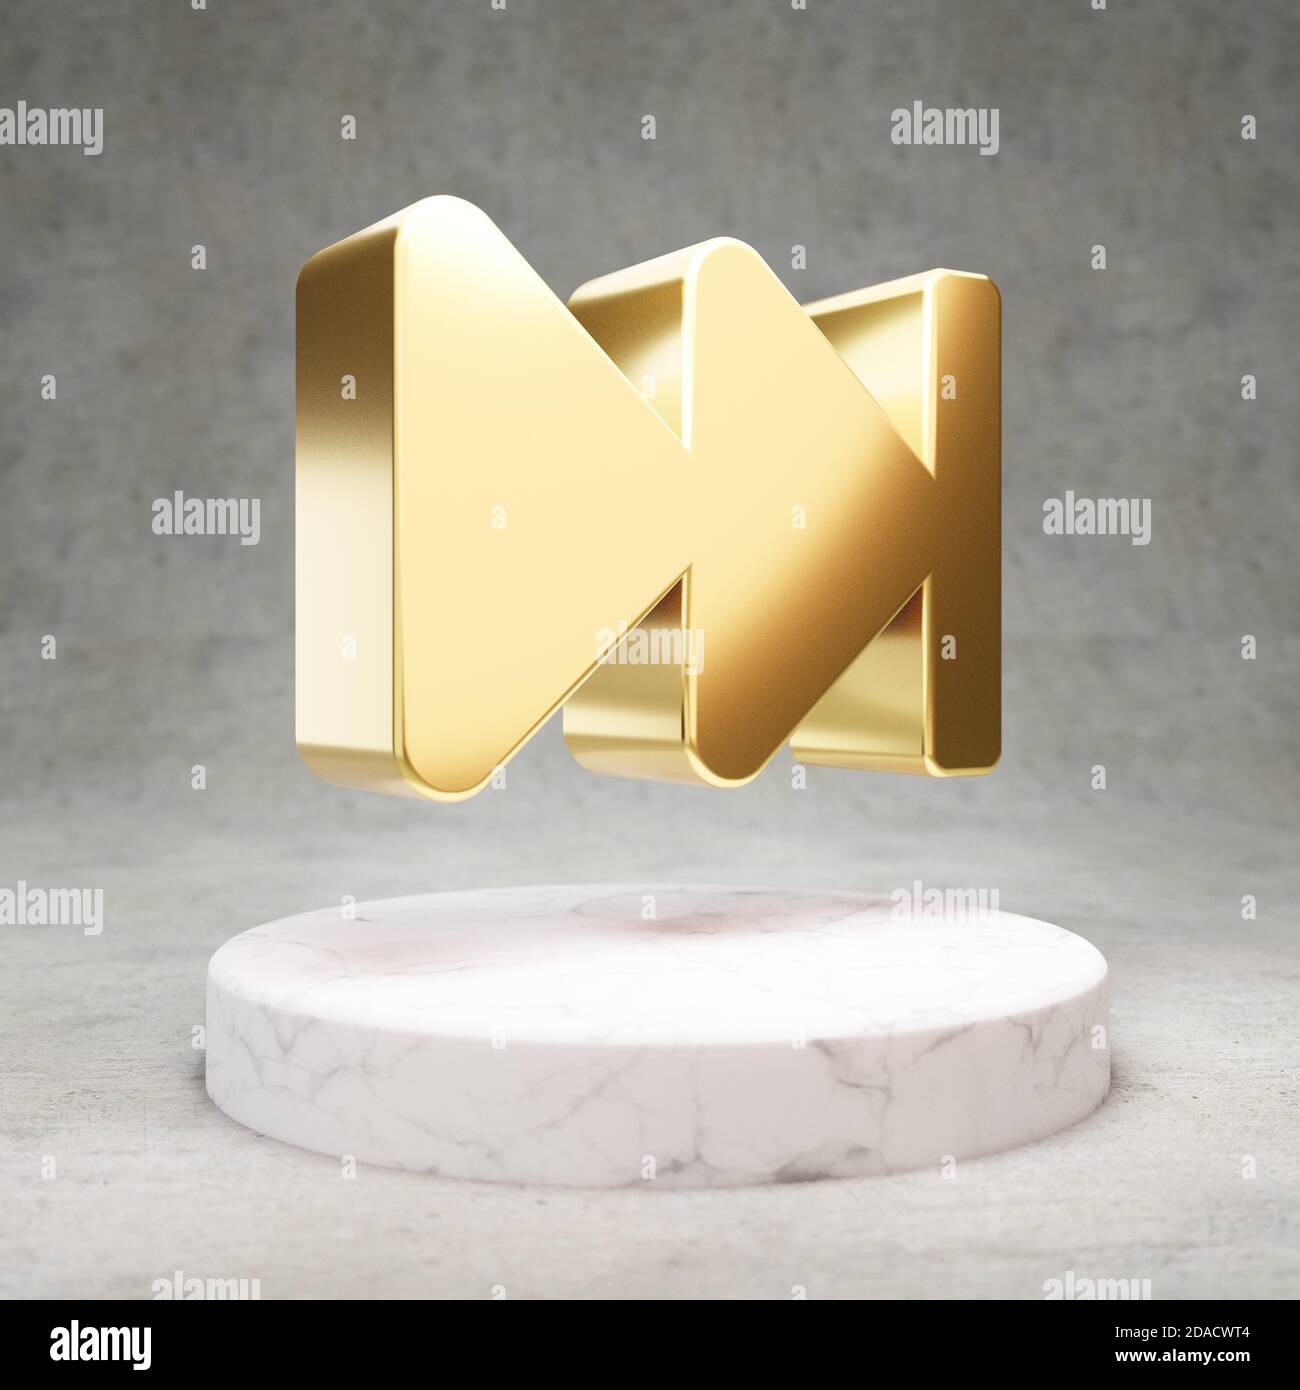 Fast Forward icon. Gold glossy Fast Forward symbol on white marble podium. Modern icon for website, social media, presentation, design template element. 3D render. Stock Photo